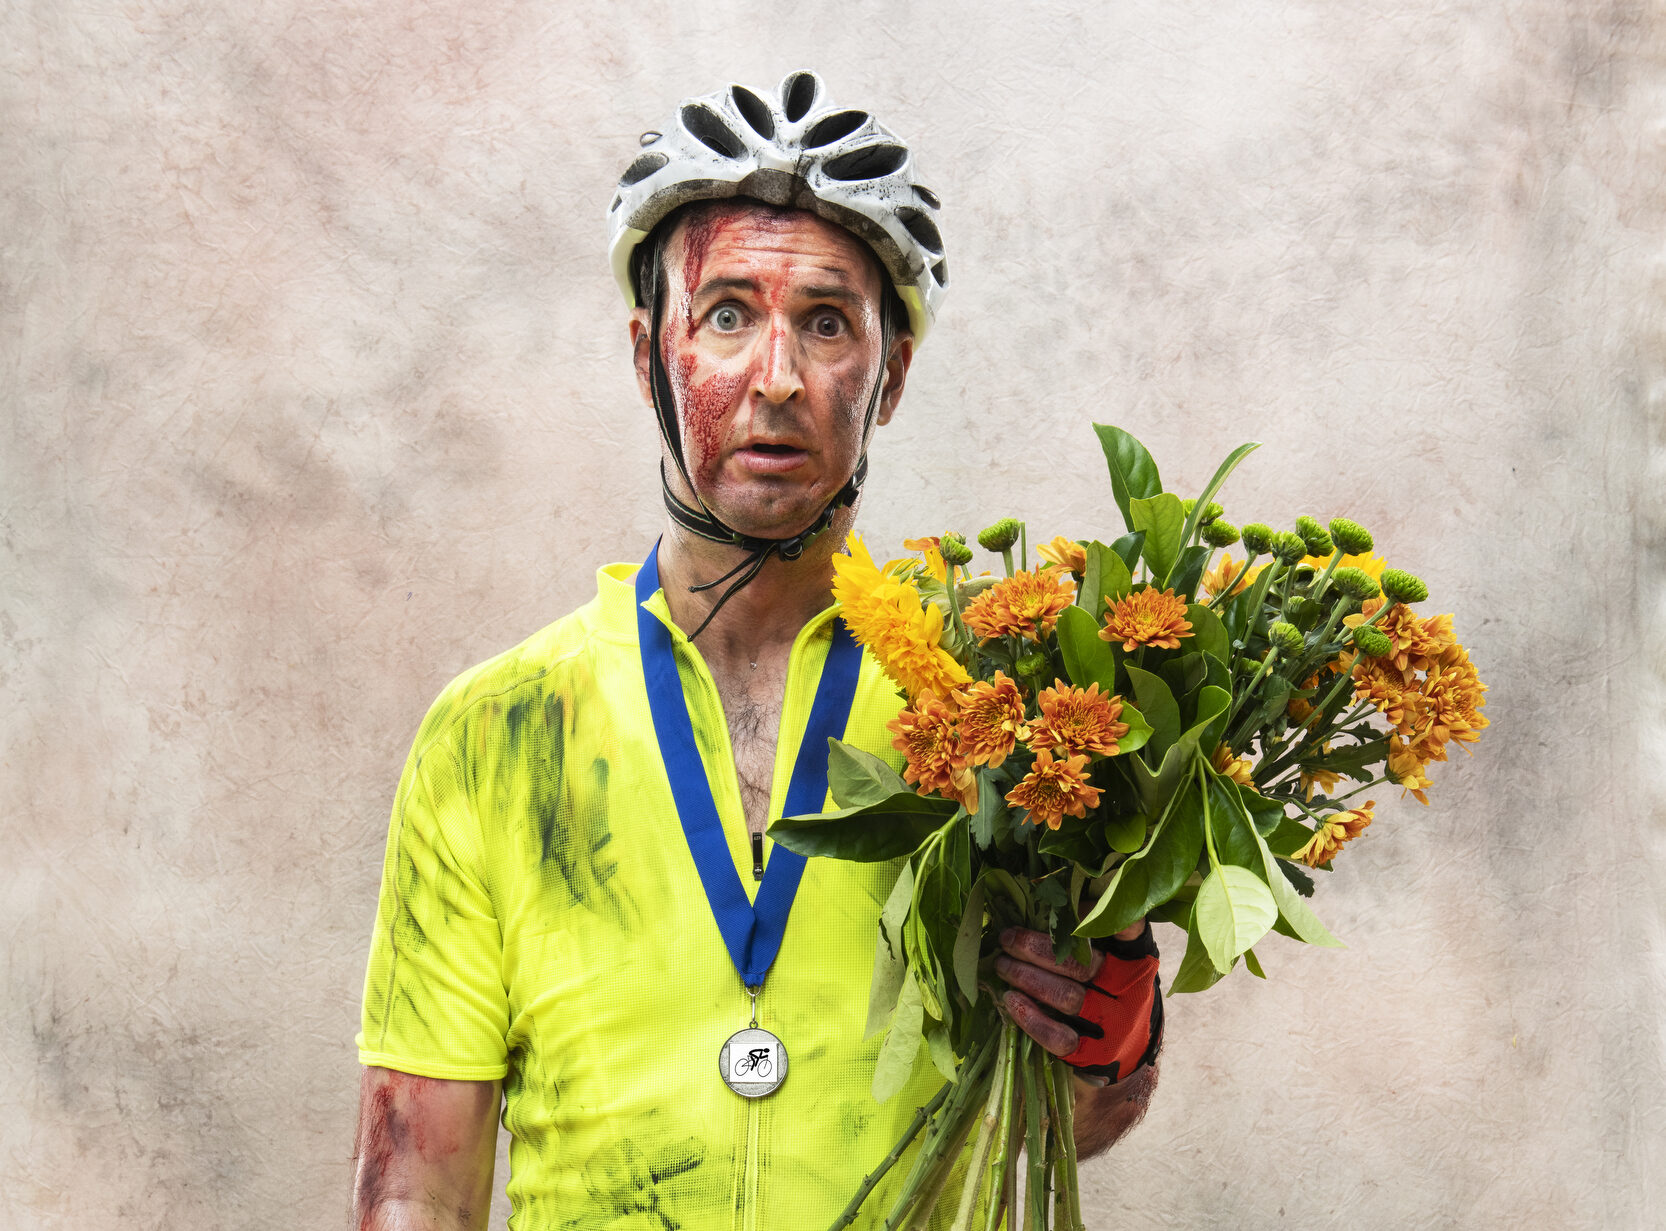 Man in cycling gear looks disheveled whilst holding a bunch of flowers and a medal around his neck